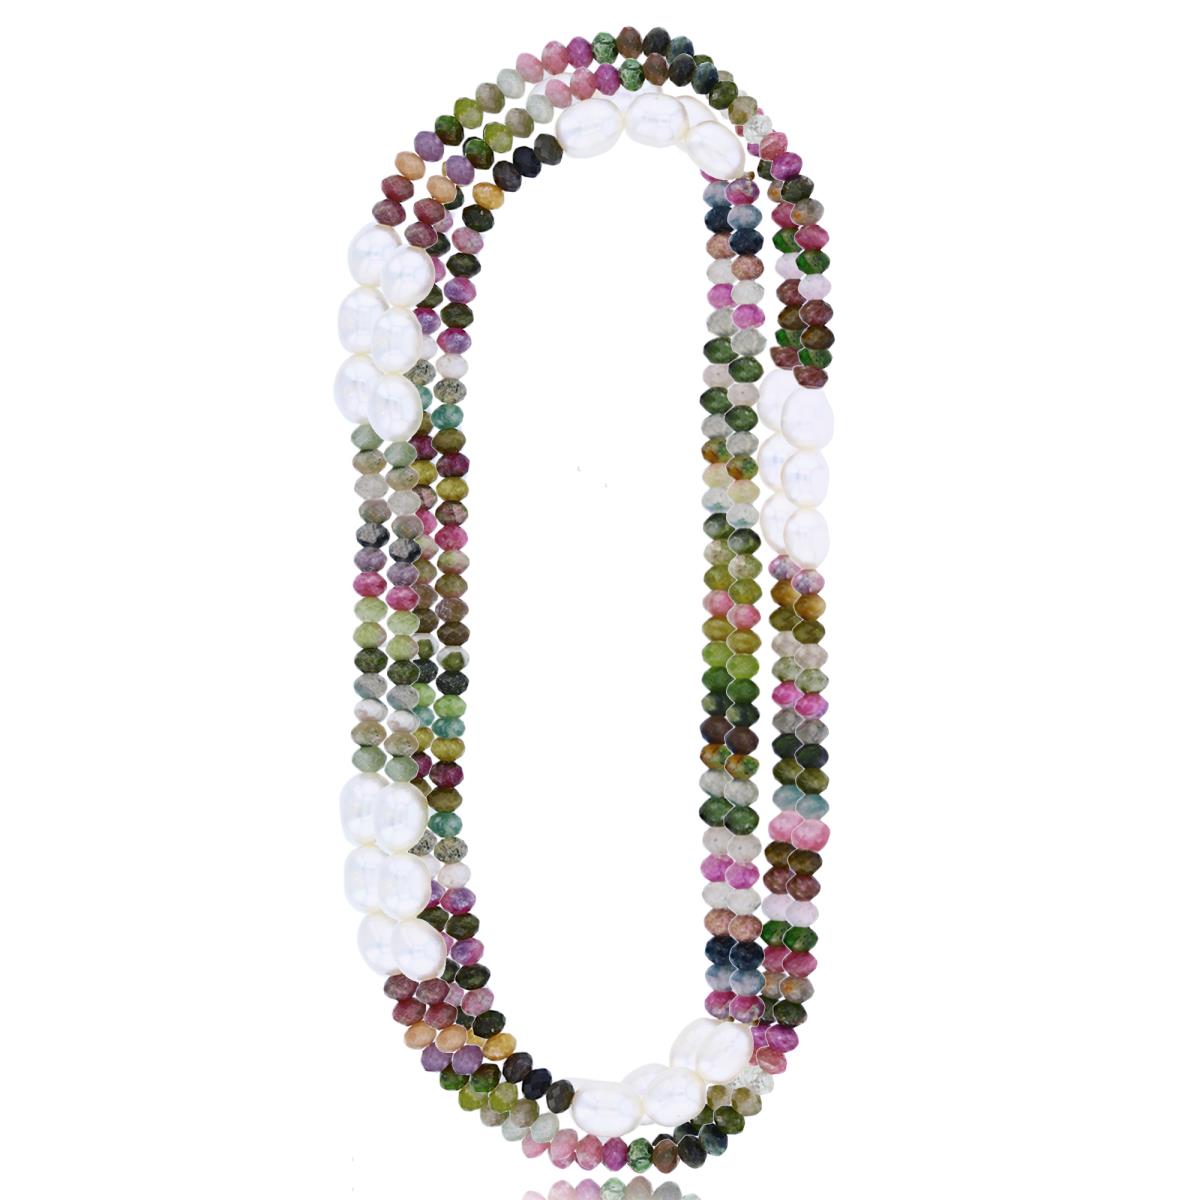 7-8mm Oval FWP & 4x5mm Tourmaline 100" Necklace